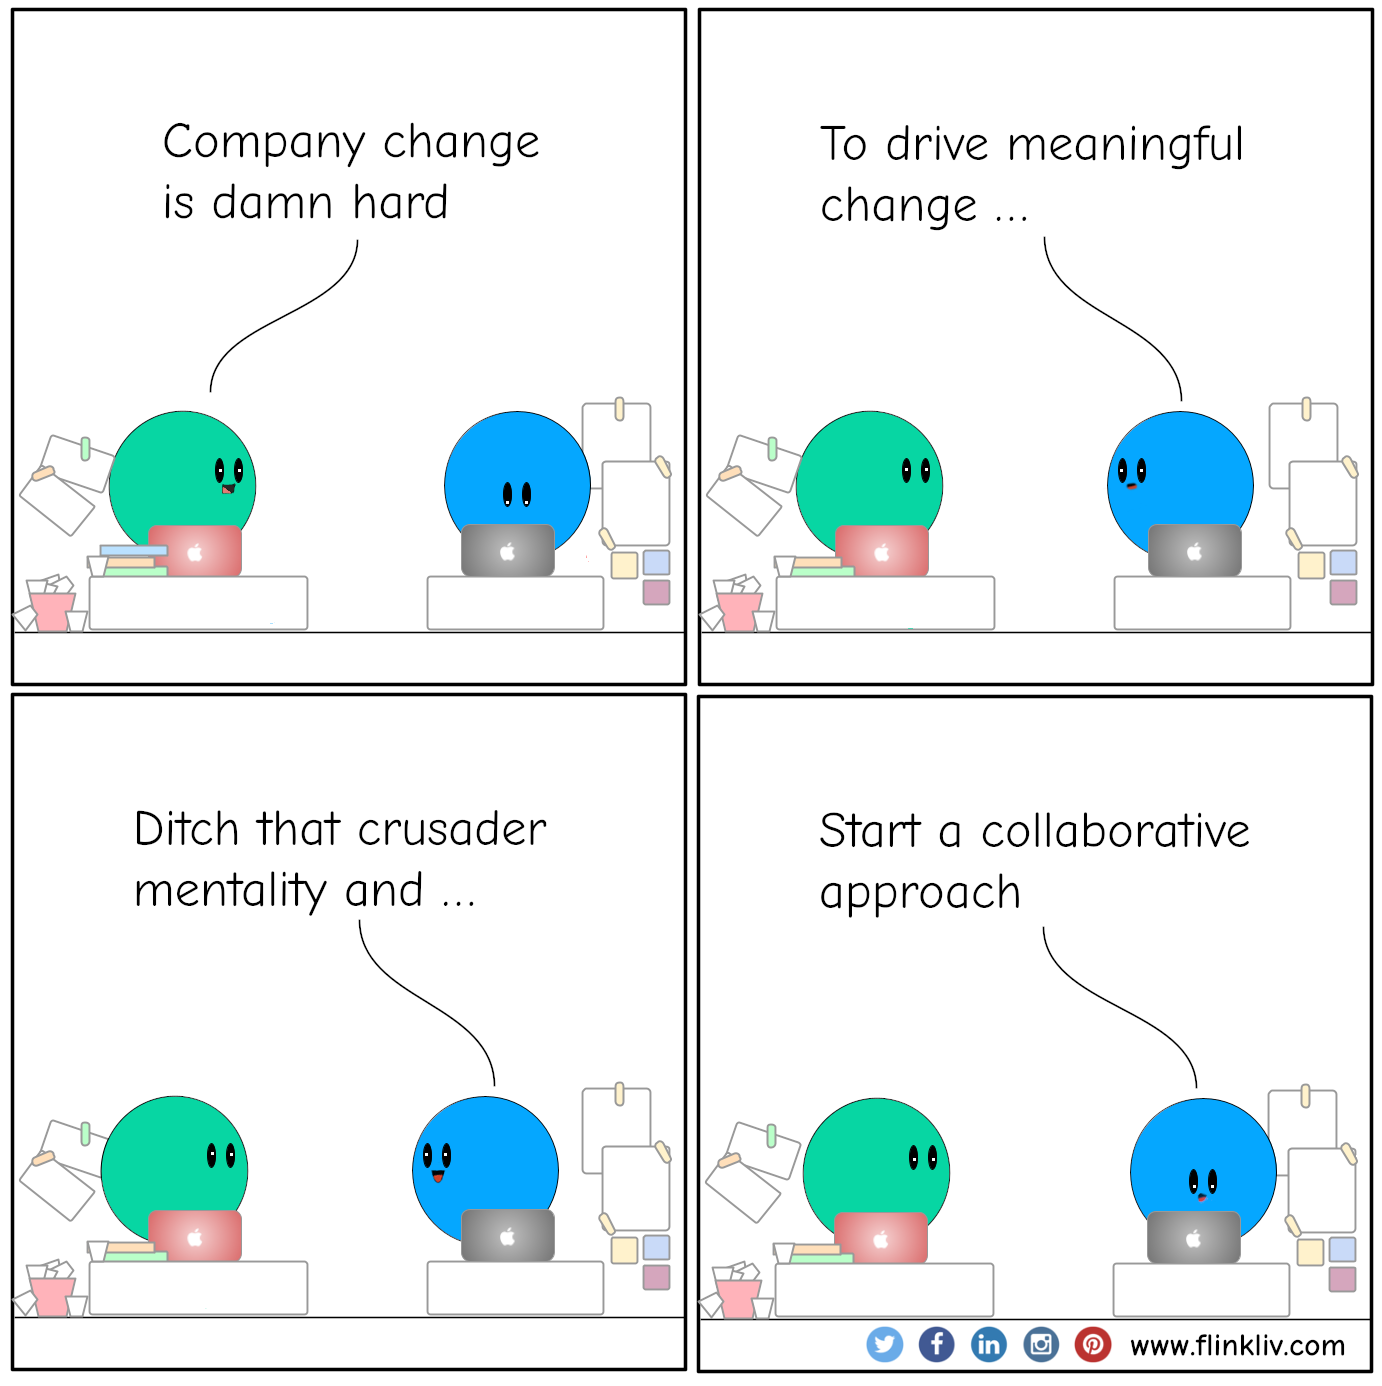 Conversation between A and B about how leaders have to shift from a crusader to a collaborative leader. A: Company change is damn hard B: To drive meaningful change B: Ditch that crusader mentality and start a collaborative approach By flinkliv.com